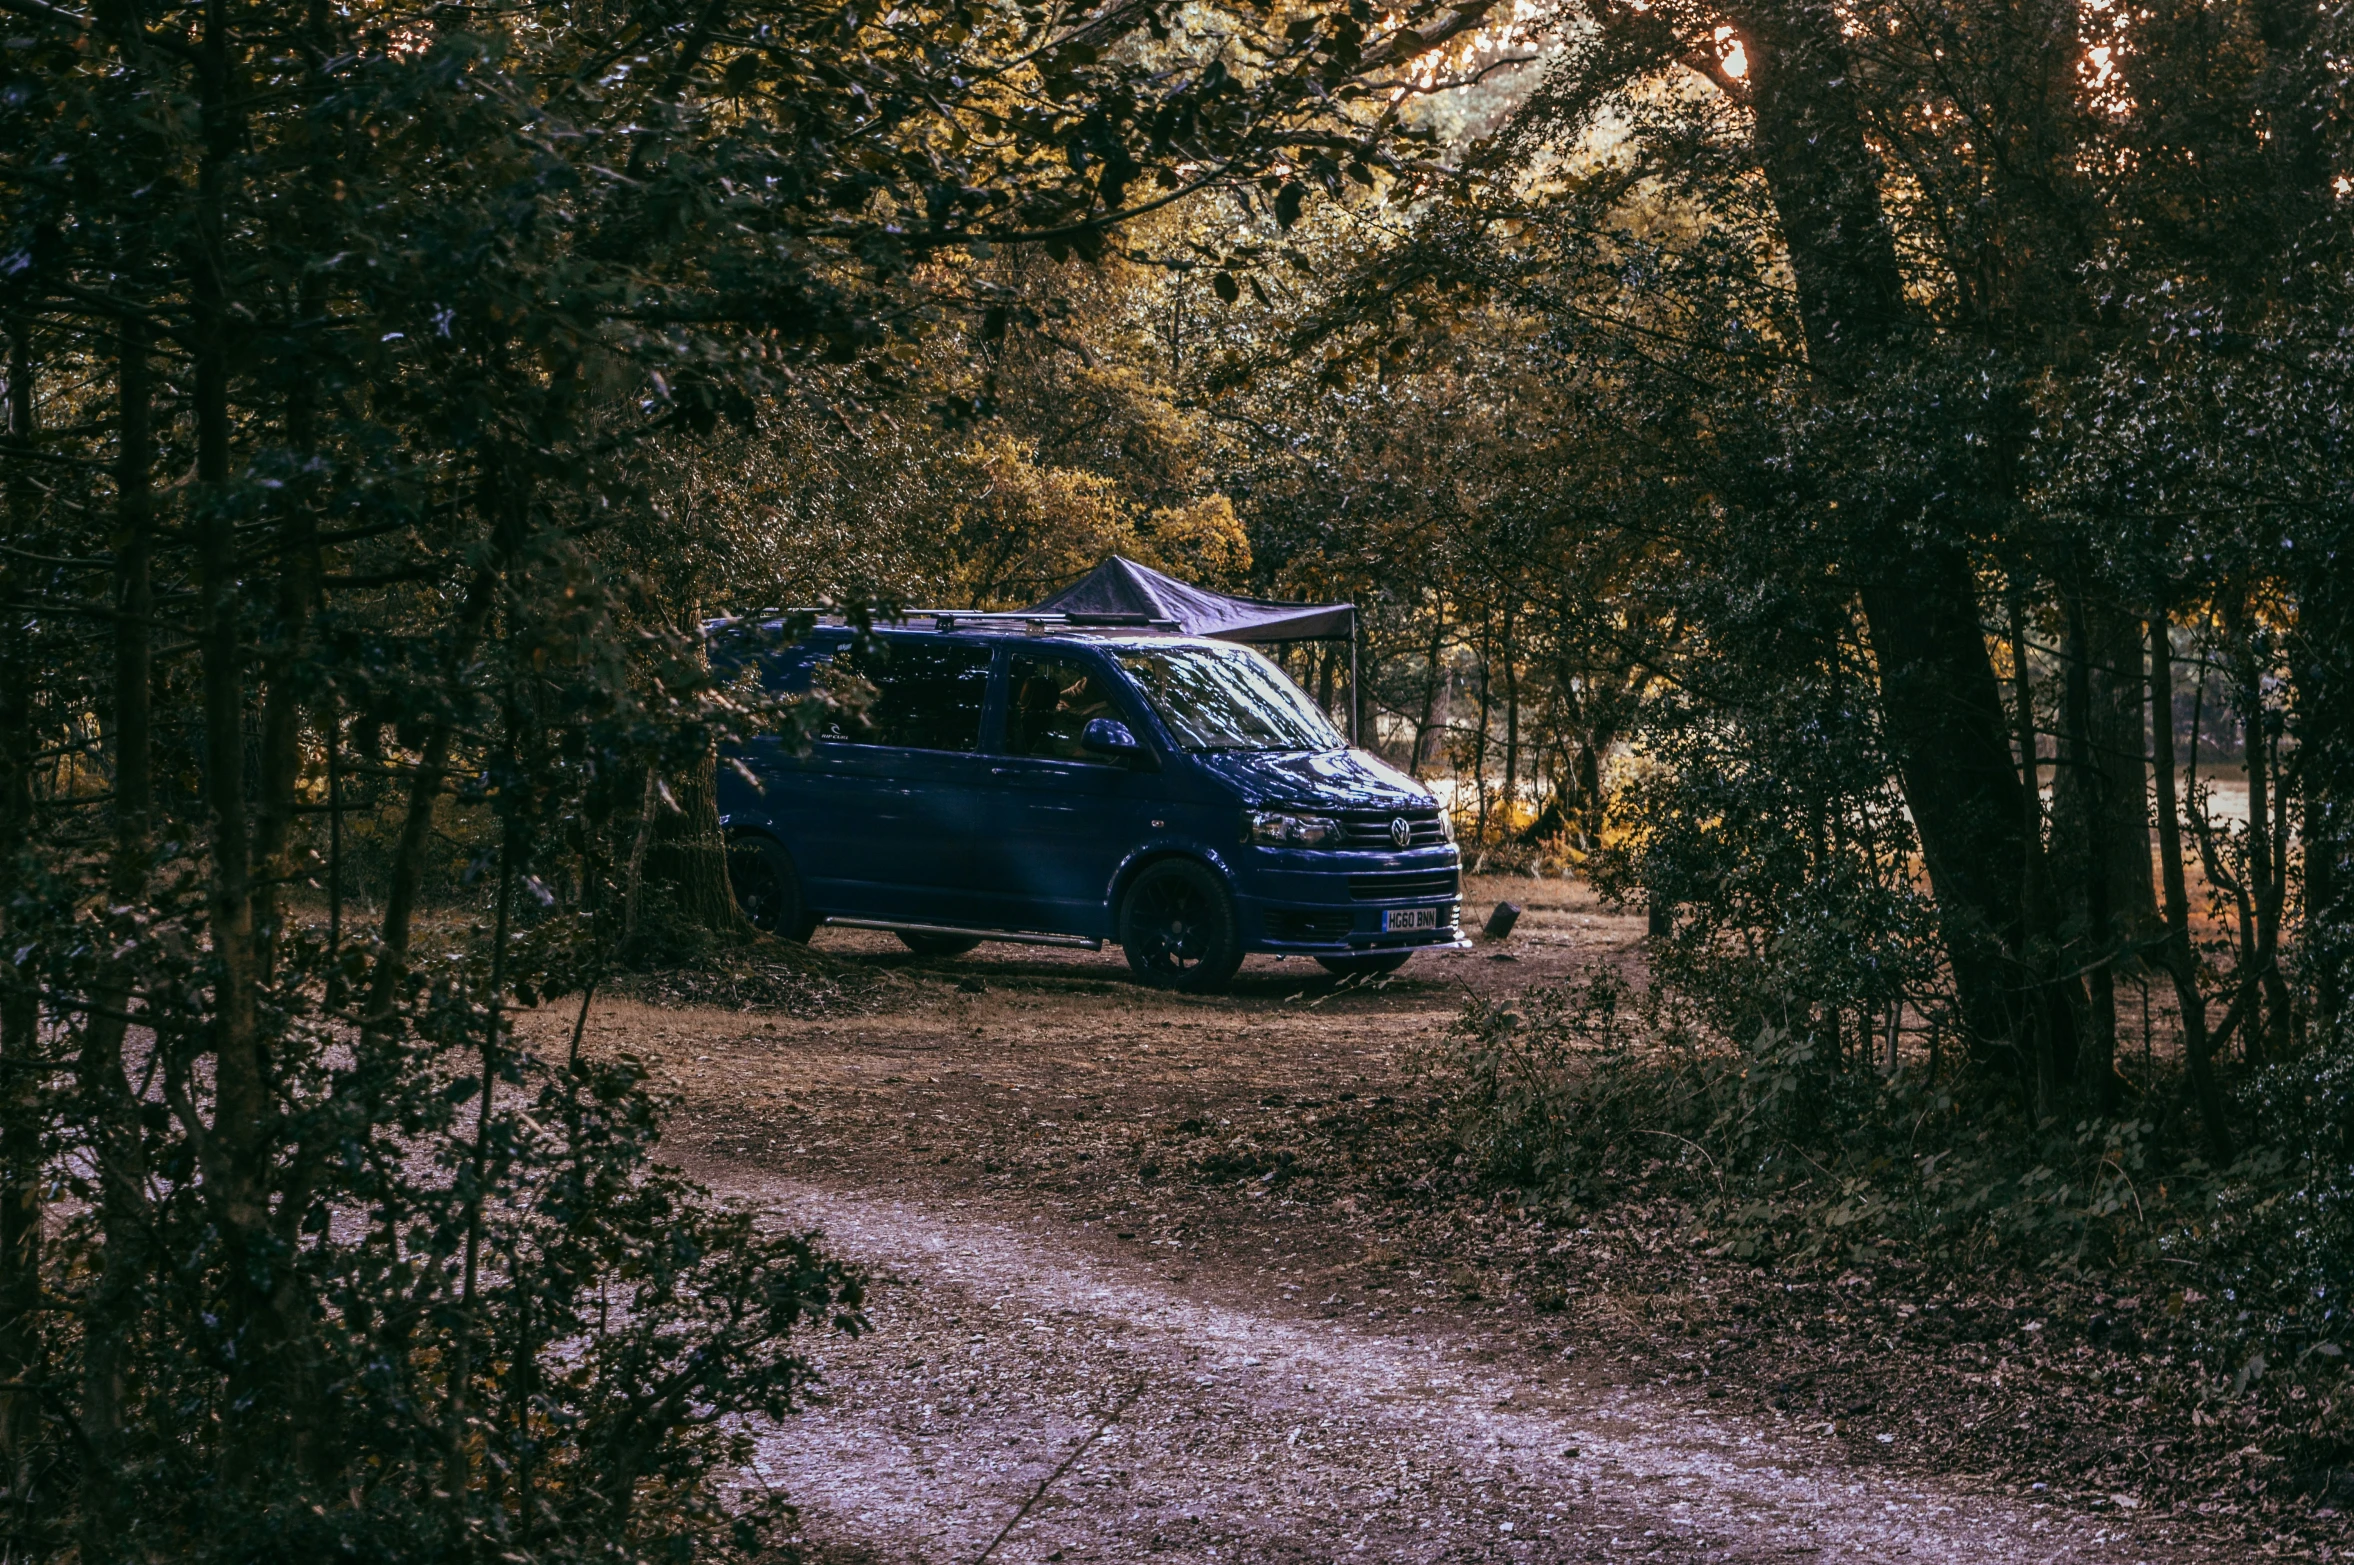 the van is parked near a trail in the woods